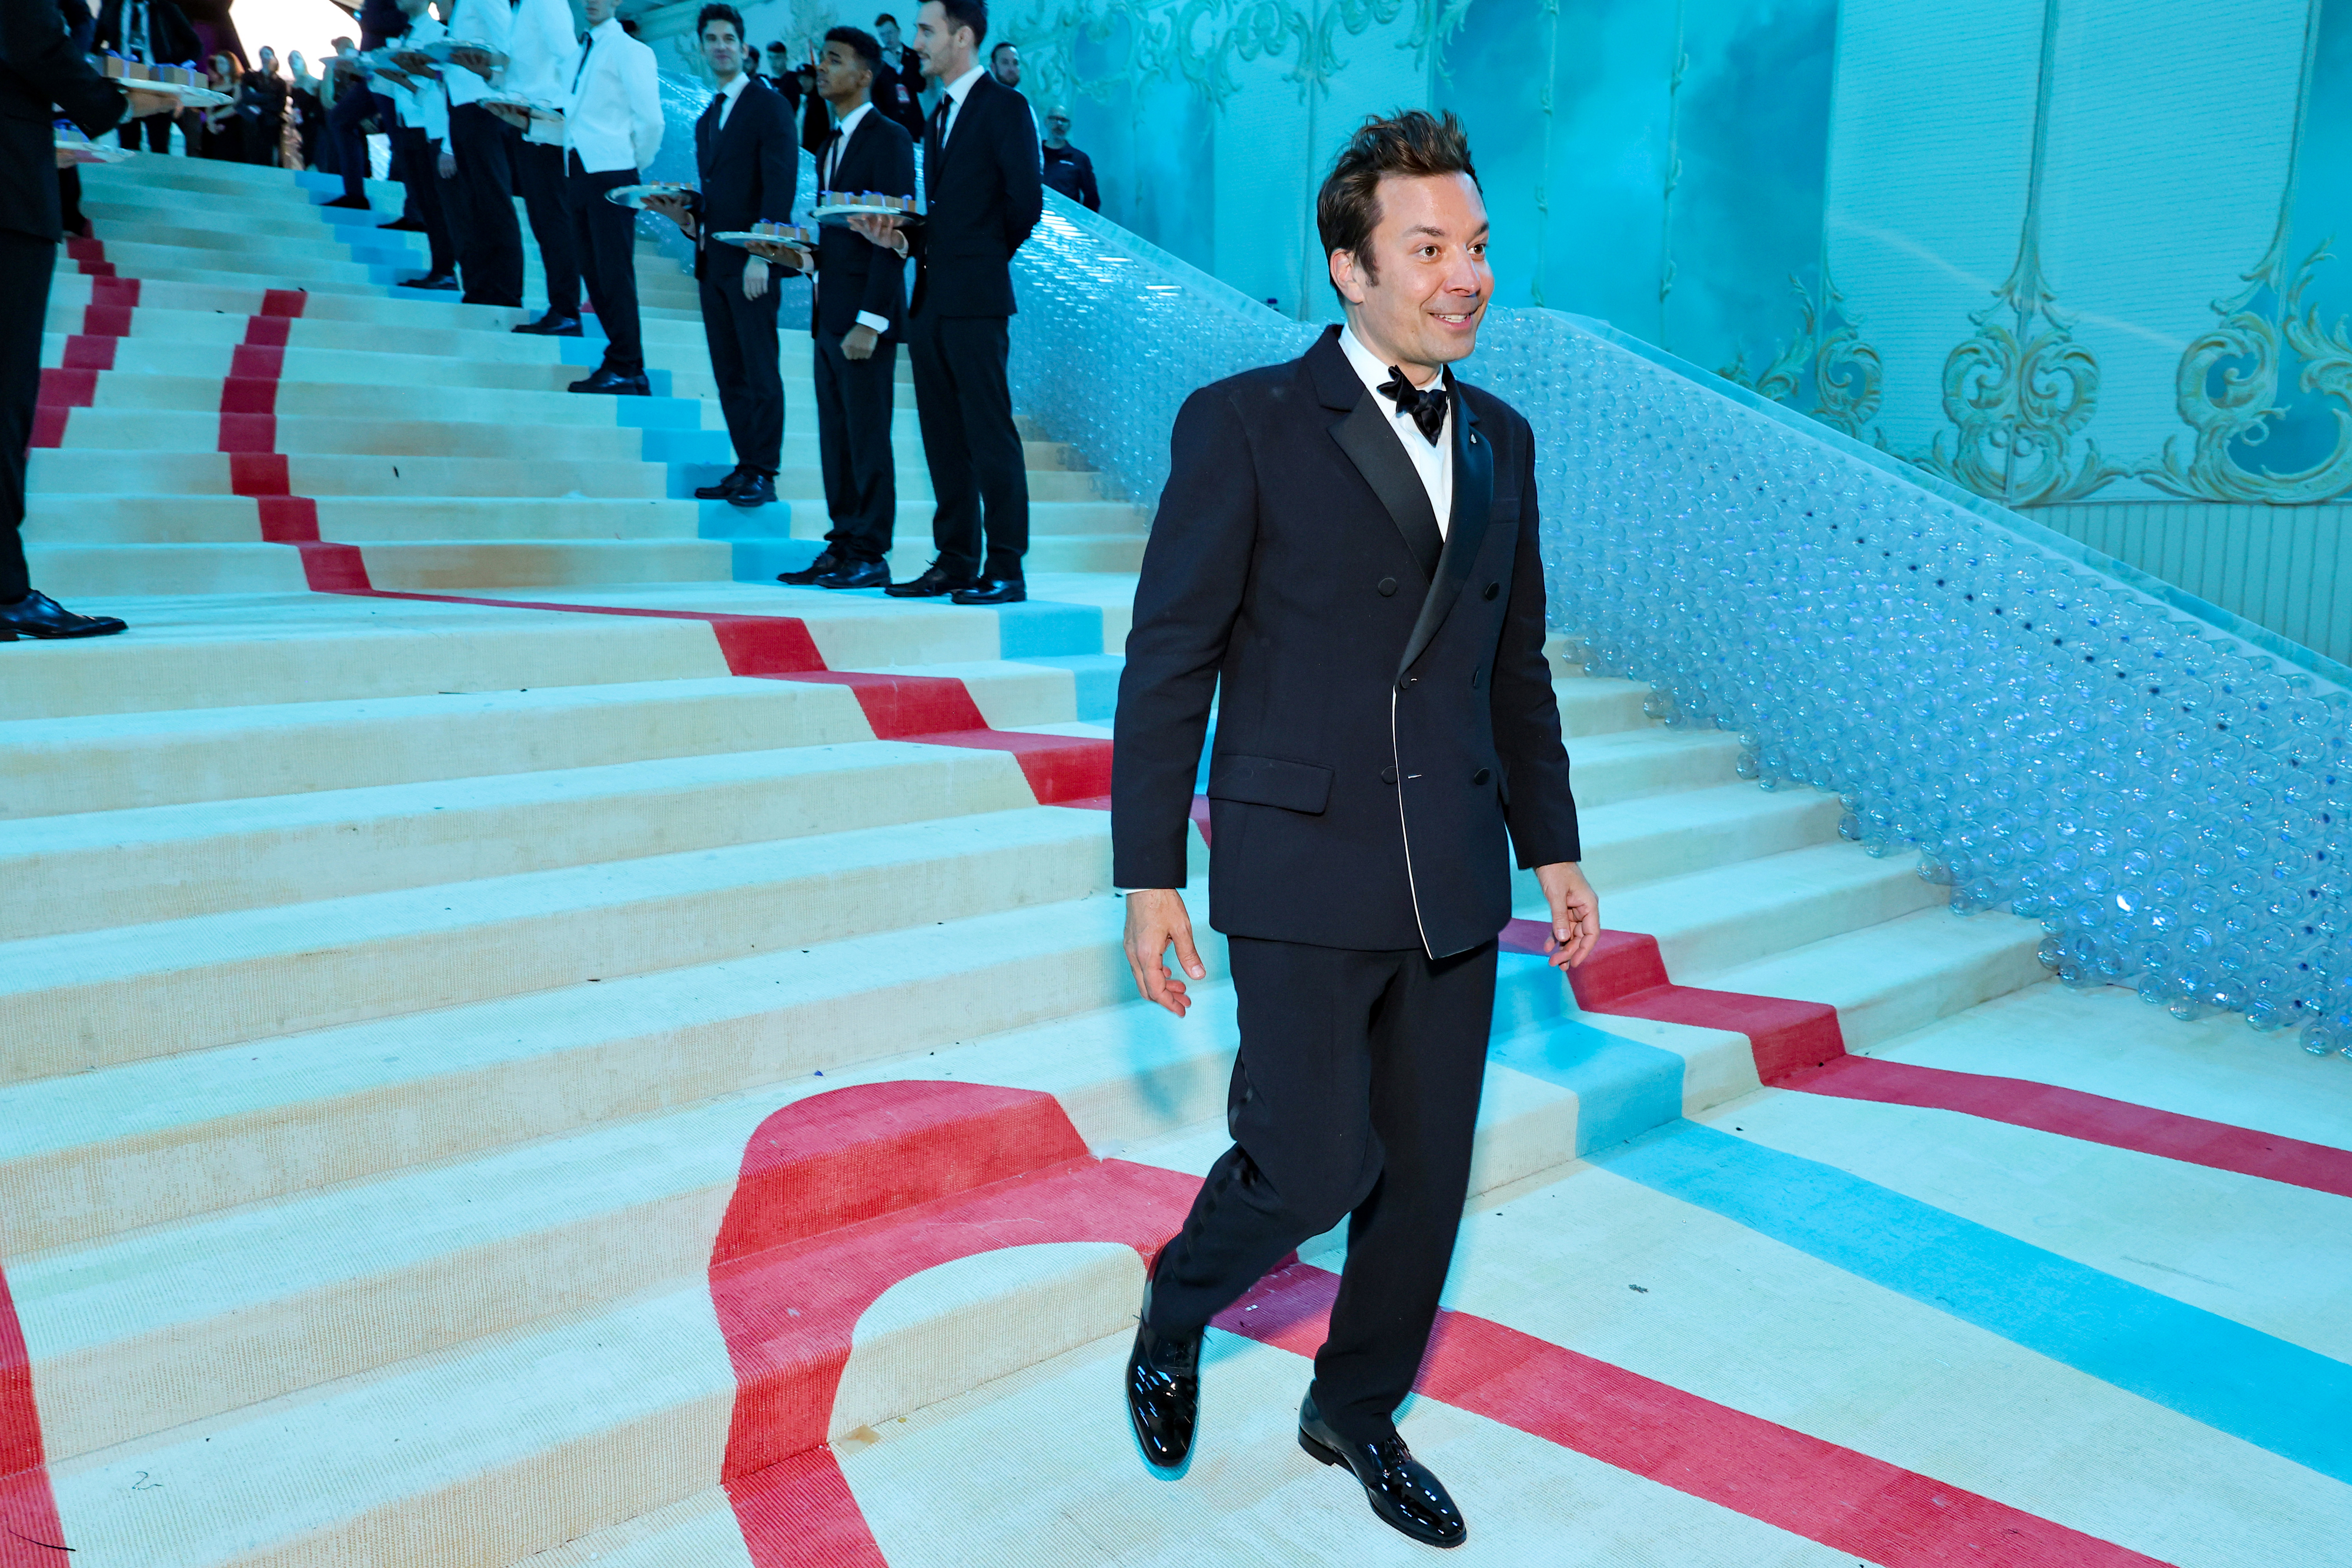 Jimmy Fallon walks down a set of grand stairs at formal event